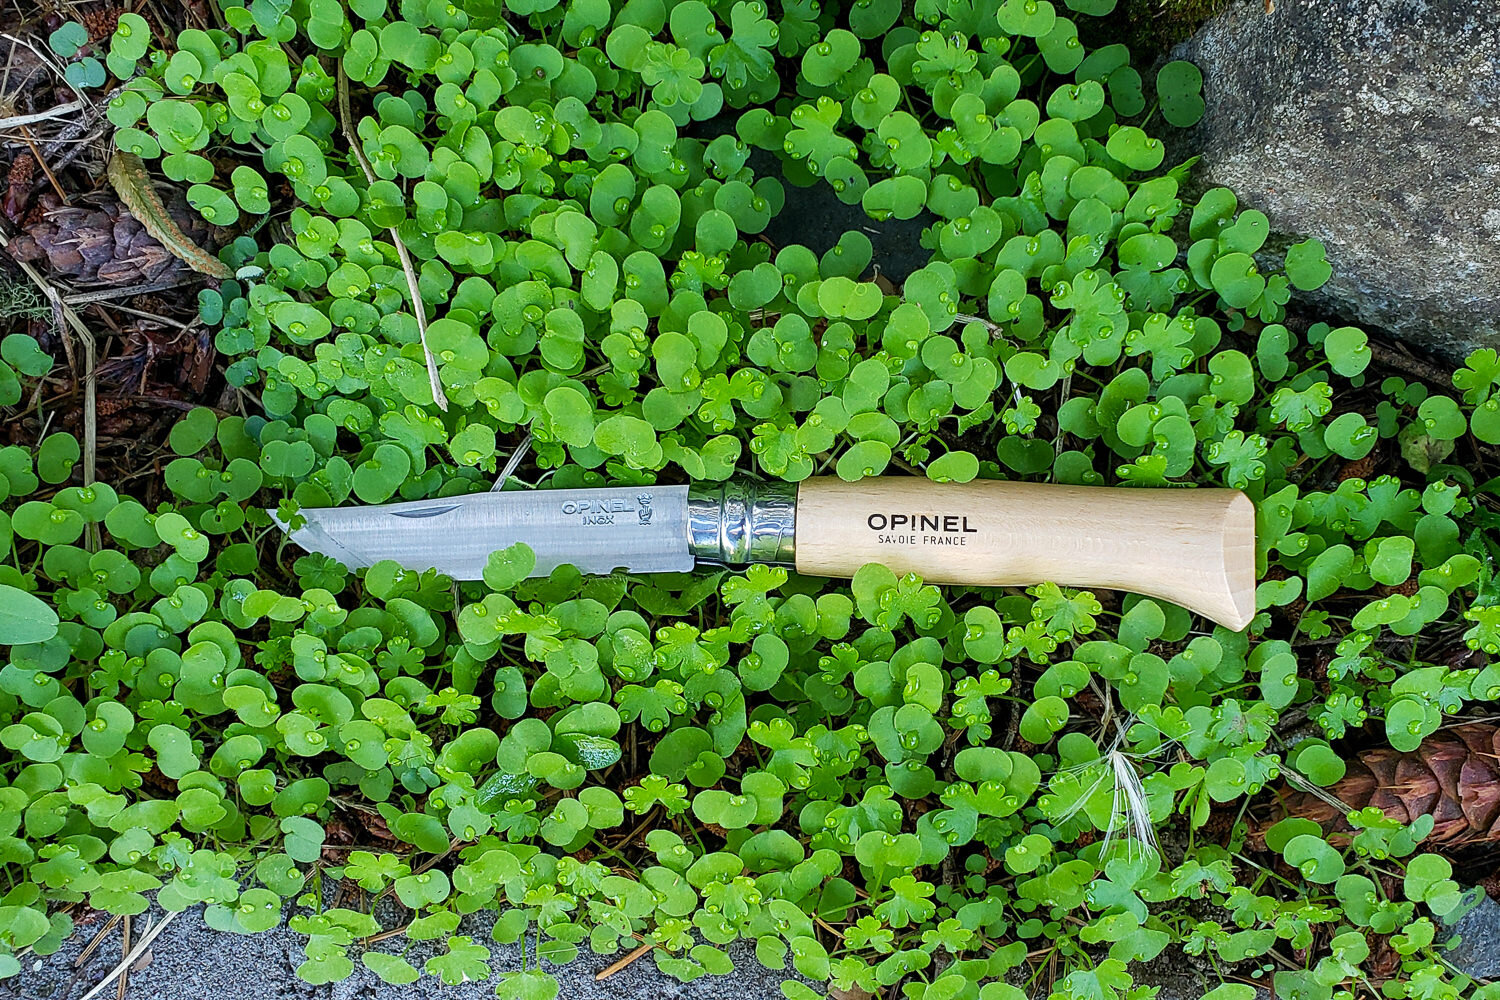 You can’t beat the affordability & low weight of the Opinel No. 8 pocket knife for basic cutting tasks